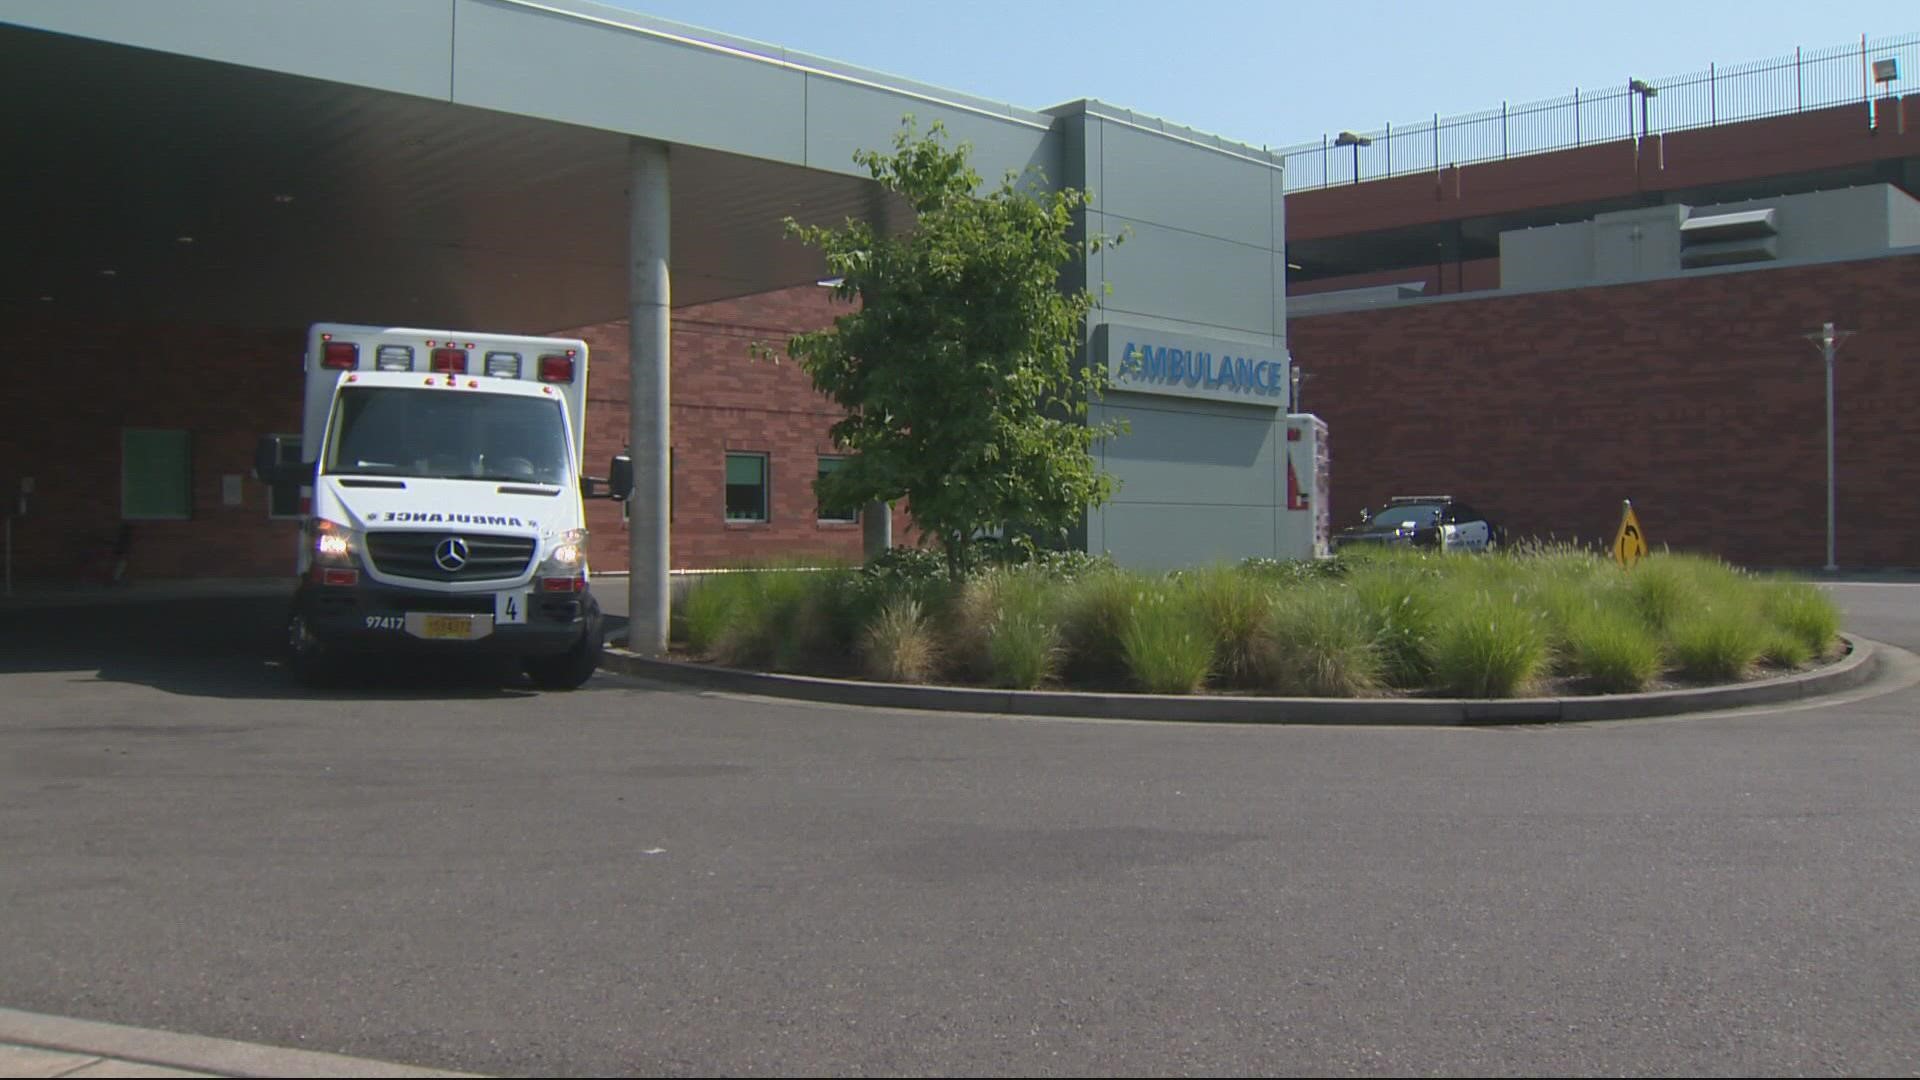 Researchers at OHSU predict Sunday was the peak for COVID hospitalizations in Oregon and they expect the numbers to fall sharply in the coming weeks.